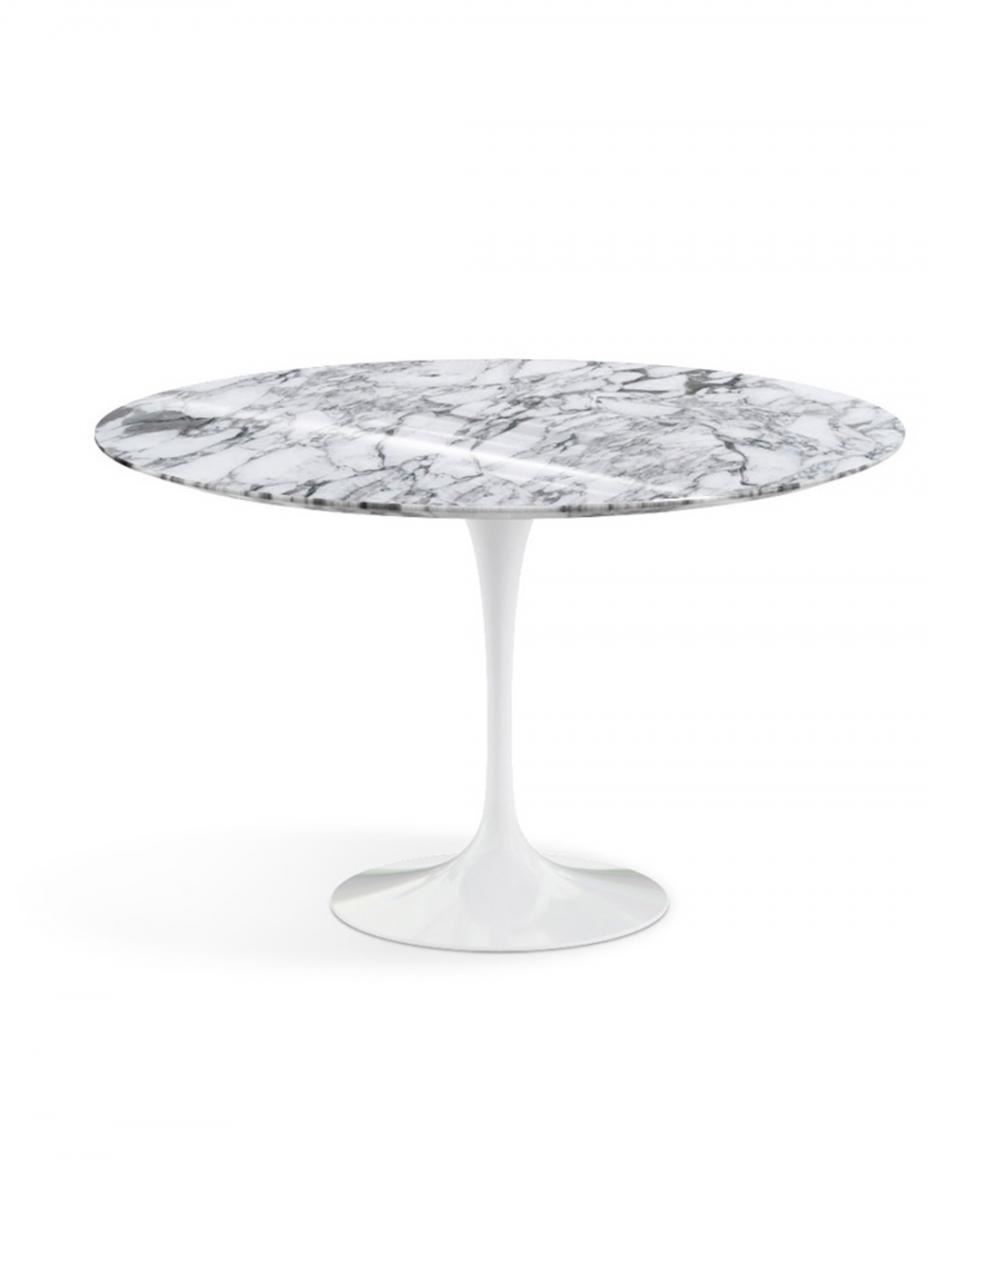 Saarinen Dining Table Round Large White Base White Marble Top